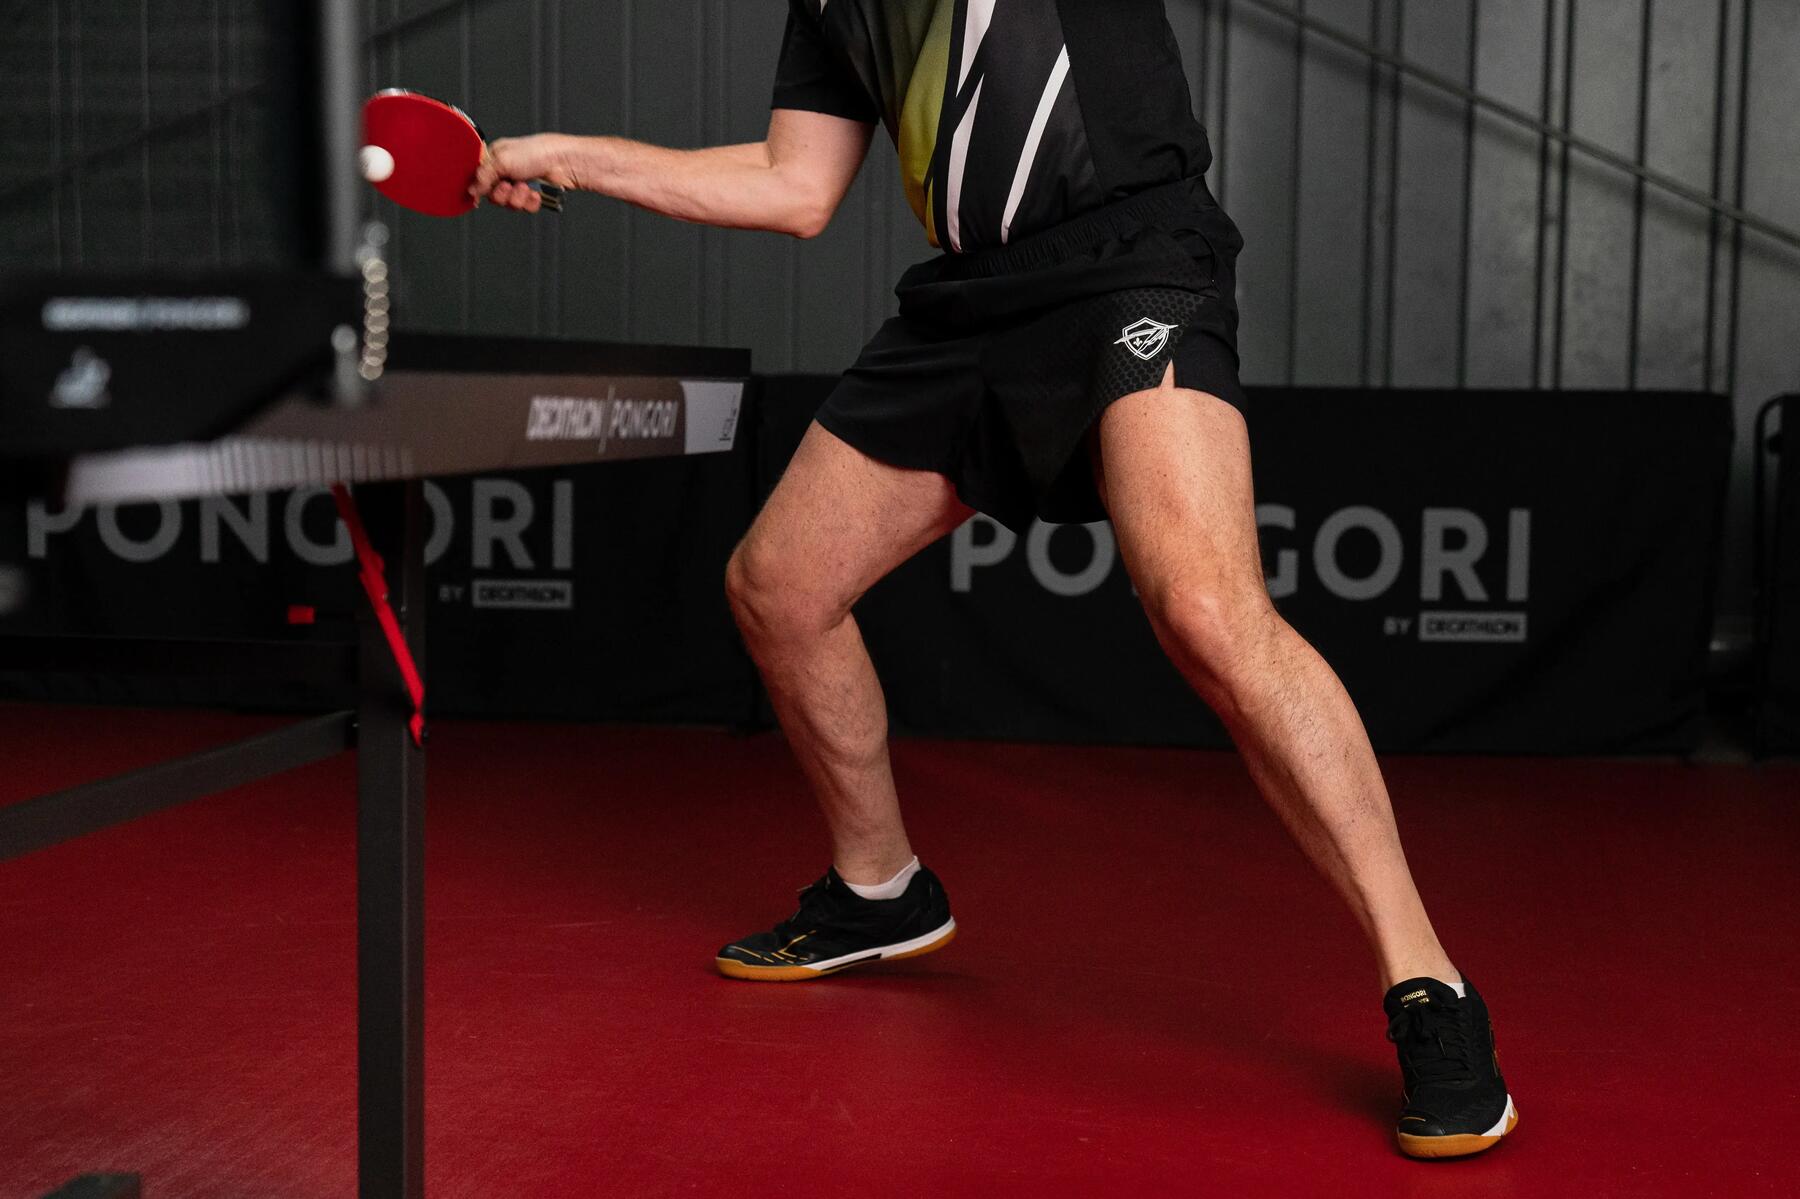 Woman serving at table tennis